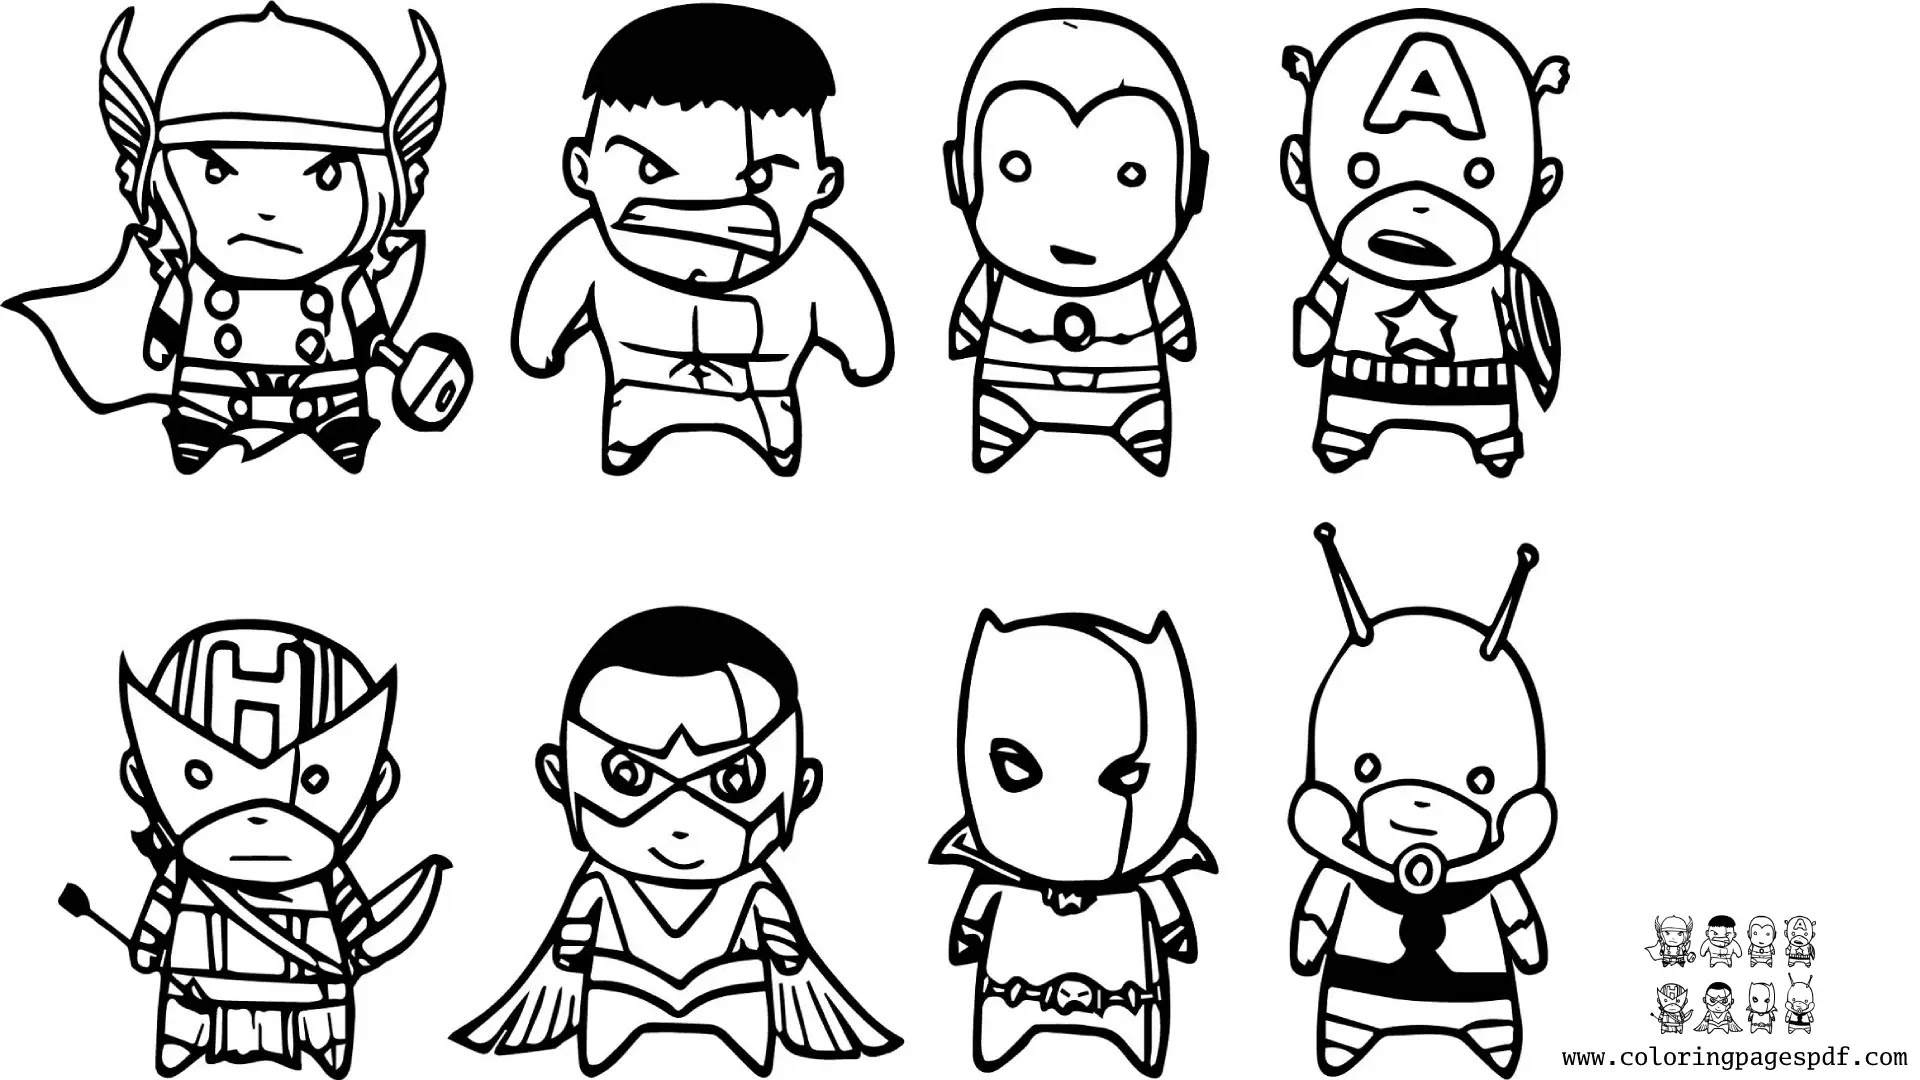 Coloring Pages Of Avengers Mini Characters